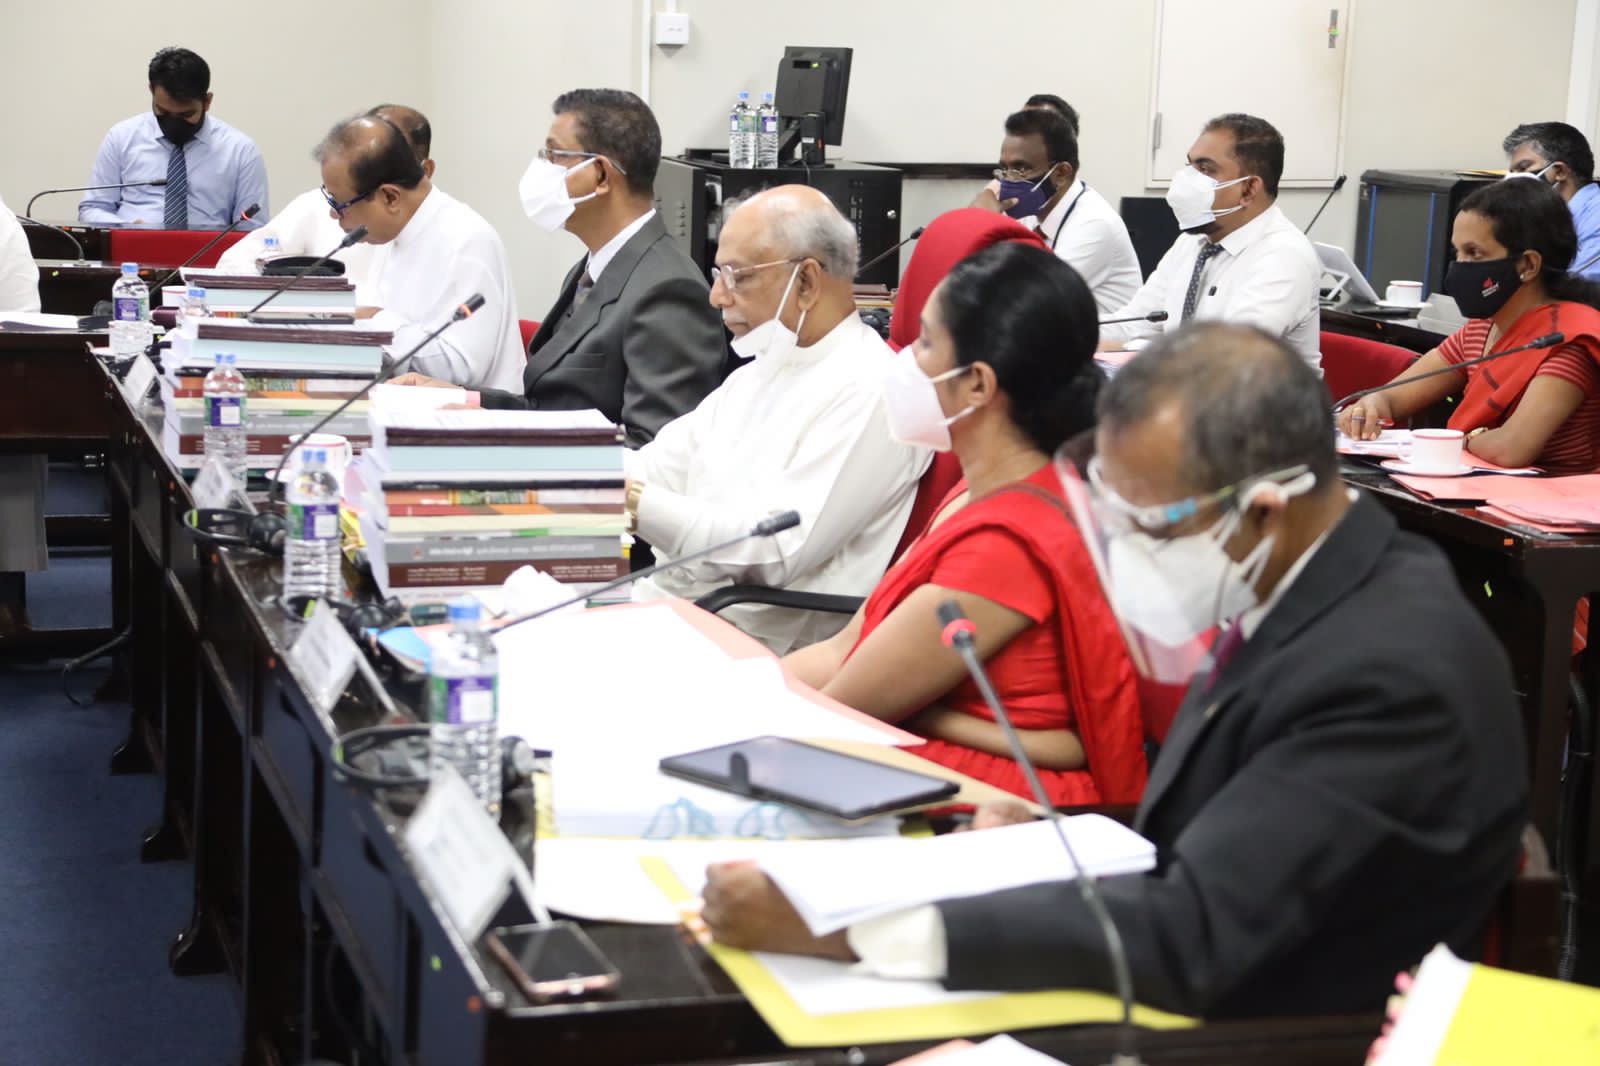 New national policy for education is being formulated – Minister of Education Dinesh Gunawardena